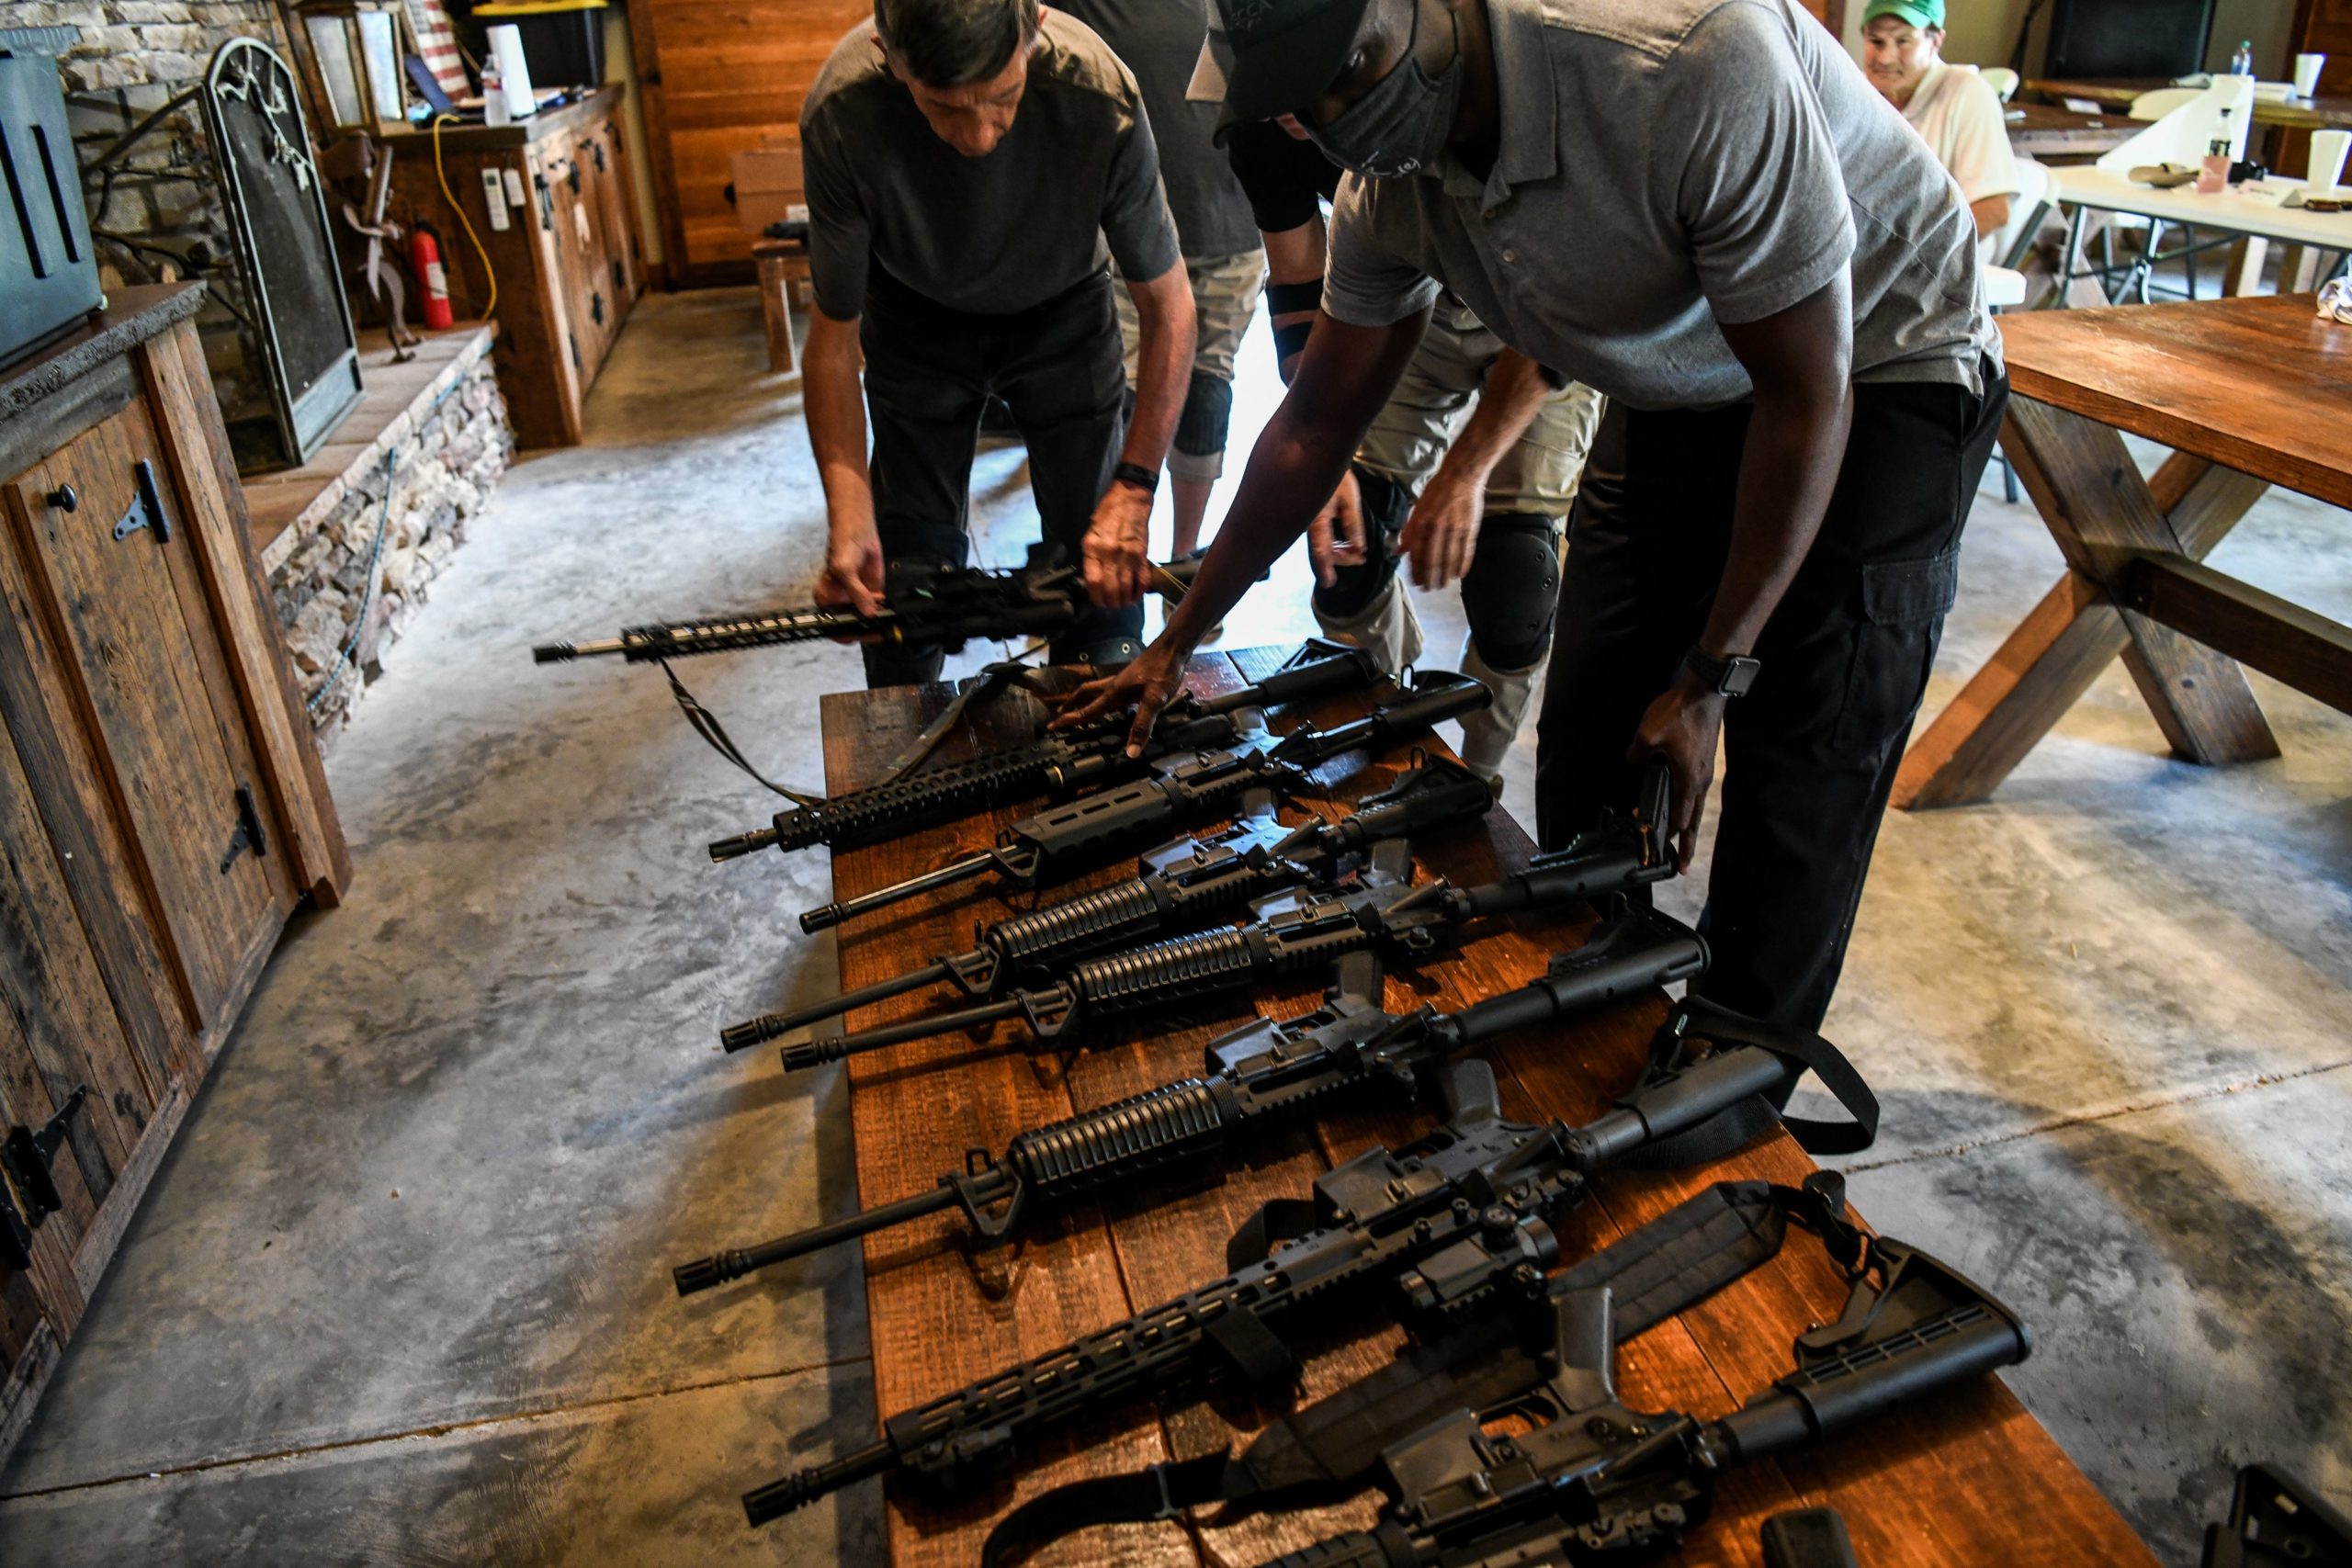 Students place their AR-15 semi-automatic rifles on a bench during a shooting course at Boondocks Firearms Academy in Jackson, Mississippi on September 26, 2020. - From the countryside to the cities, Americans are engaged in a frenzy of gun-buying fueled by the pandemic, protests and politics. (CHANDAN KHANNA/AFP via Getty Images)